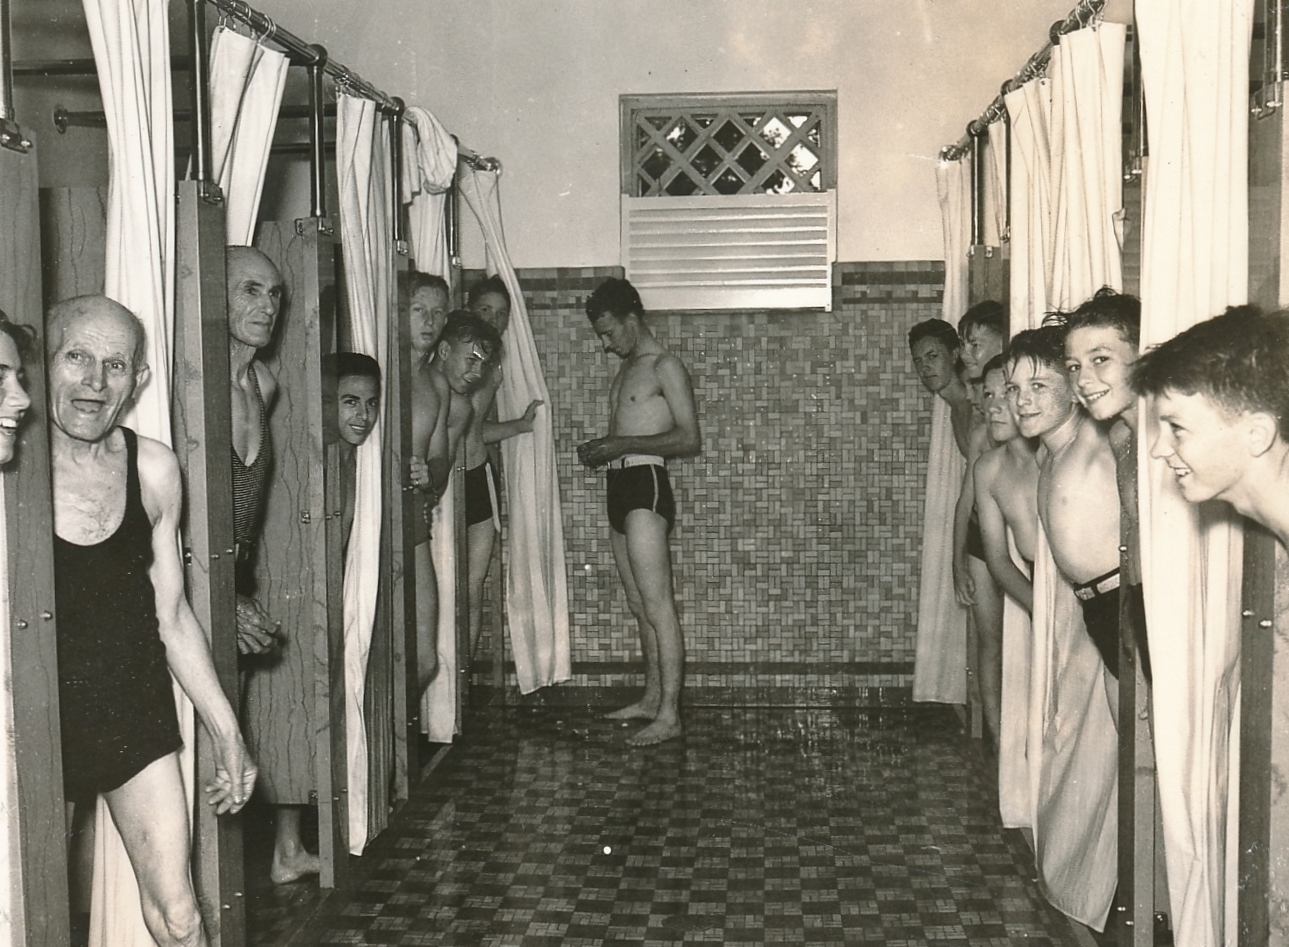 New and clean showers, and plenty of them, bring cheer to this WPA-built swimming pool facility in Monroe, Louisiana. Photo courtesy of the National Archives (ca. 1935-1943).